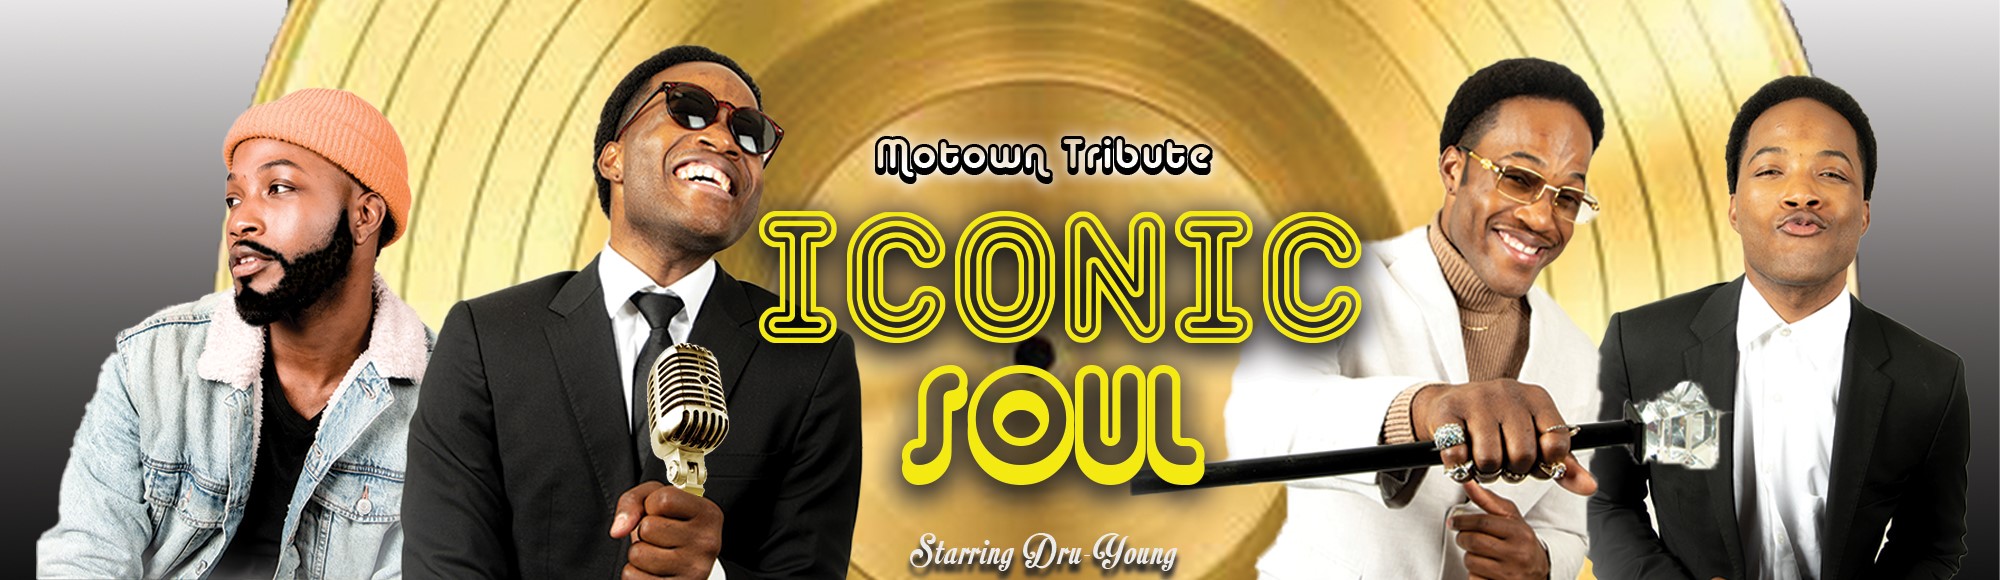 Motown Tribute: Iconic Soul show